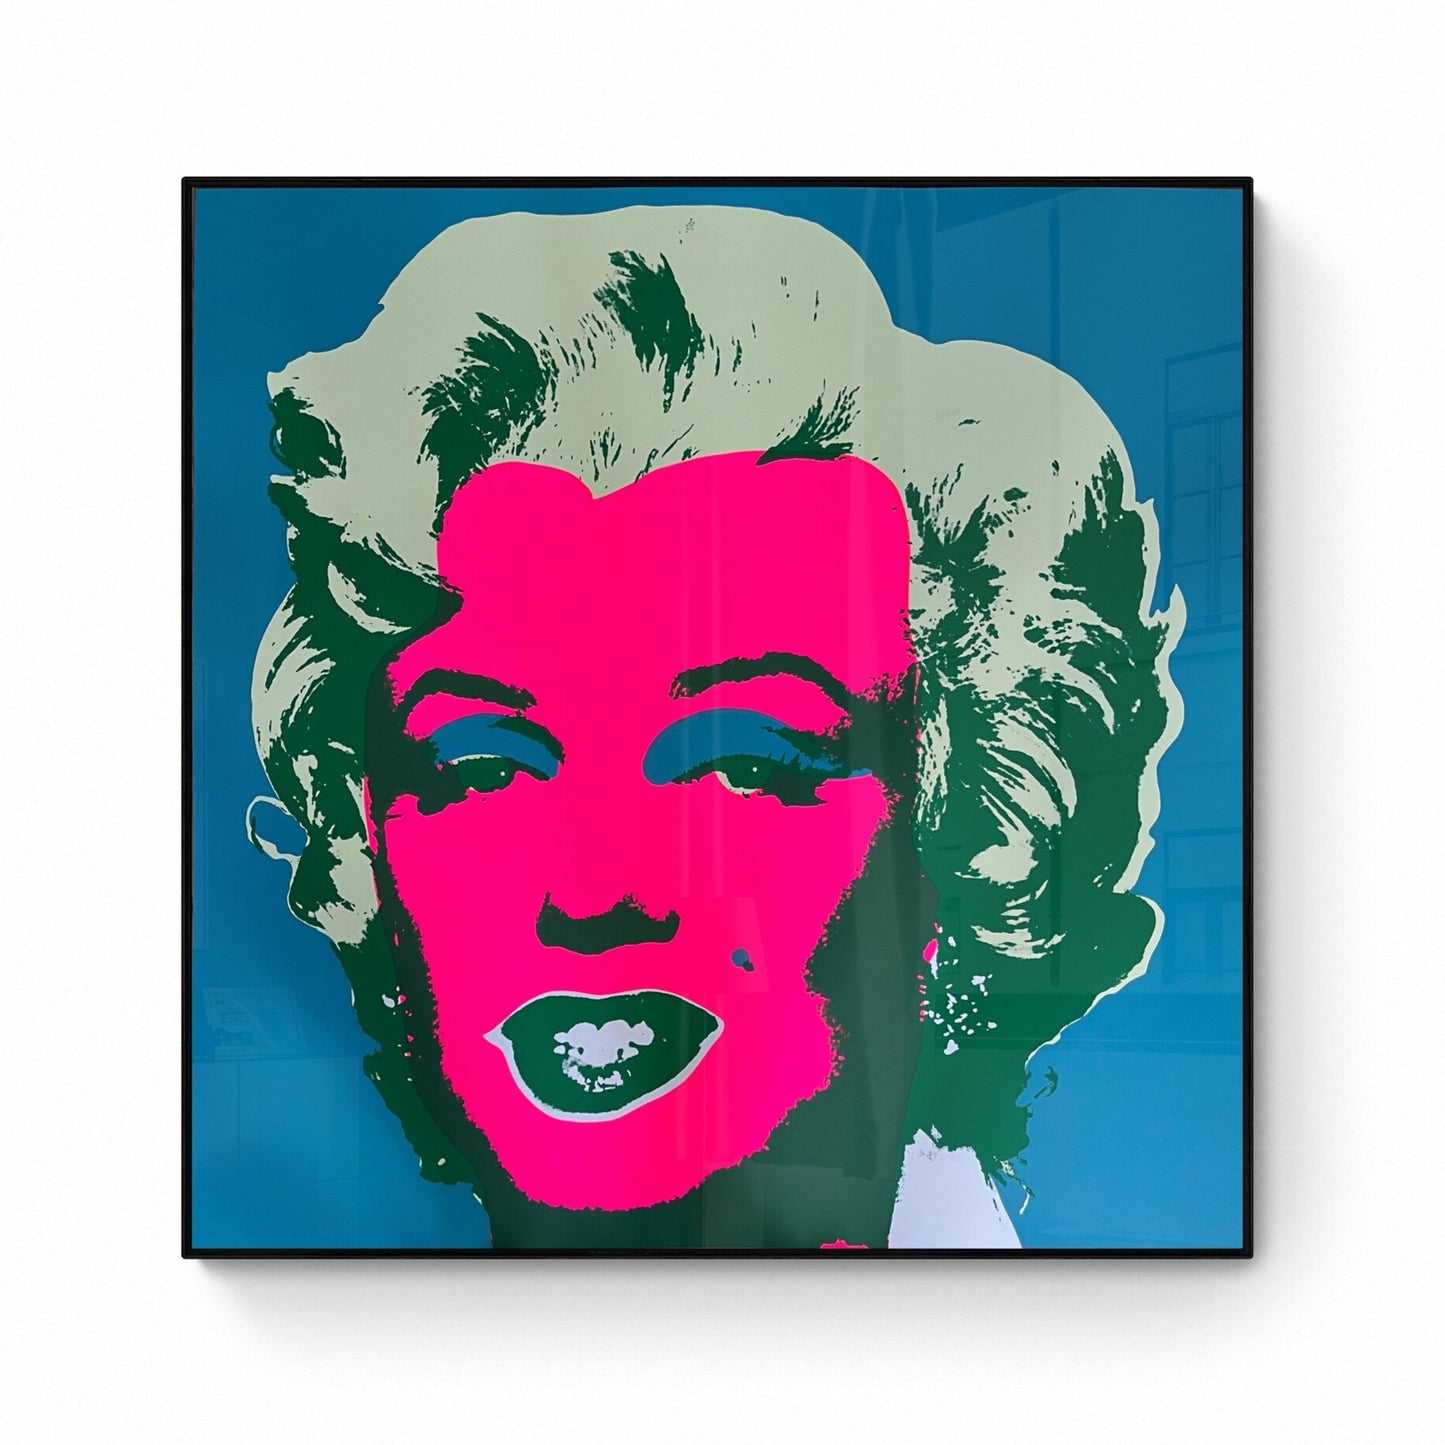 Andy Warhol - Marilyn Monroe - 1980 - Official Serigraph